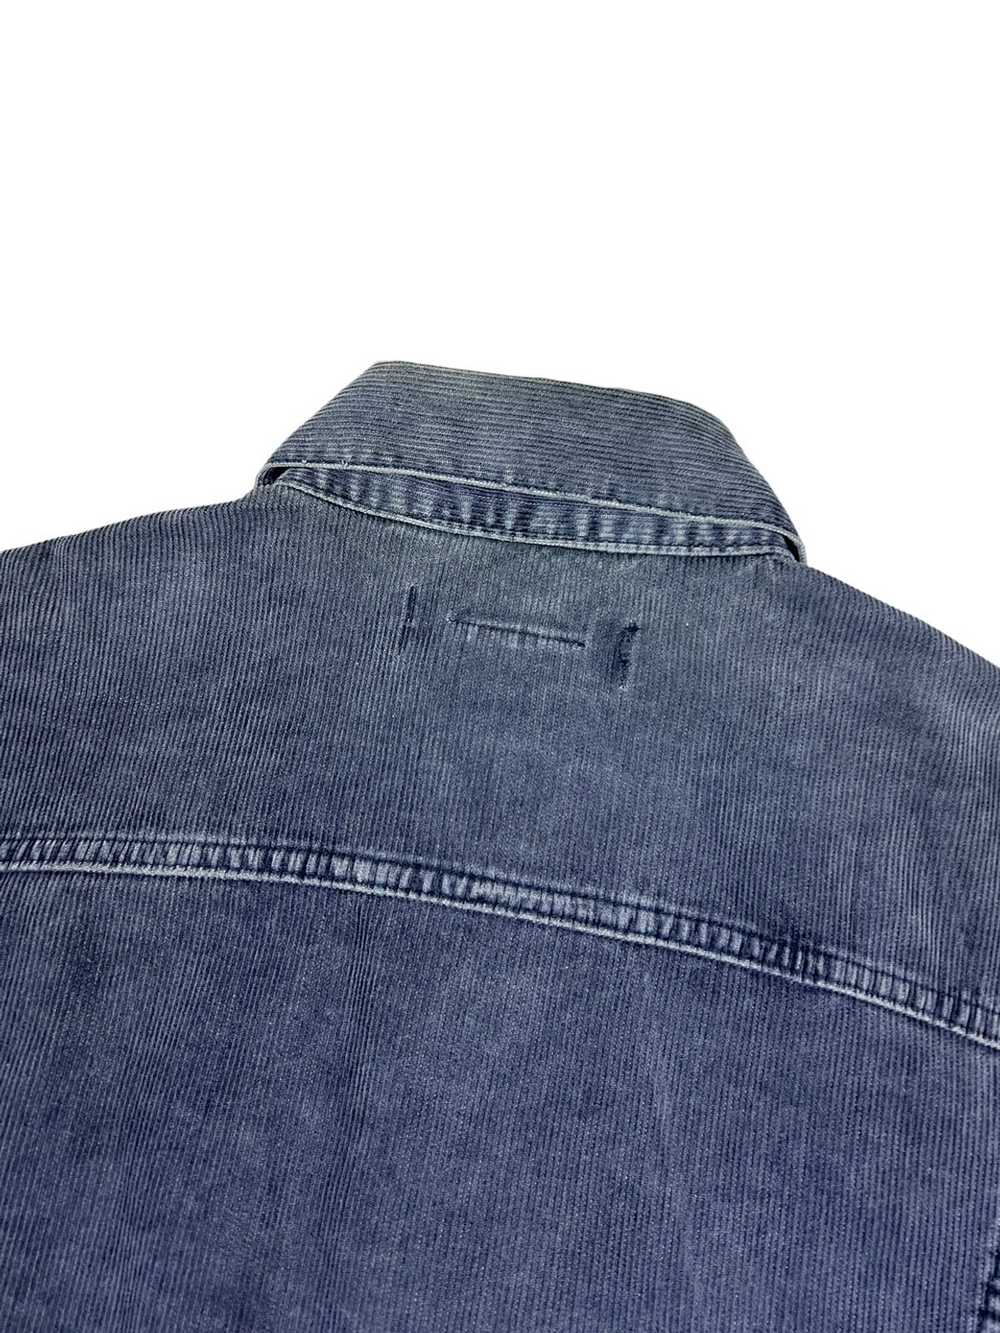 Japanese Brand × Remi Relief Remi Relief Corduroy… - image 10